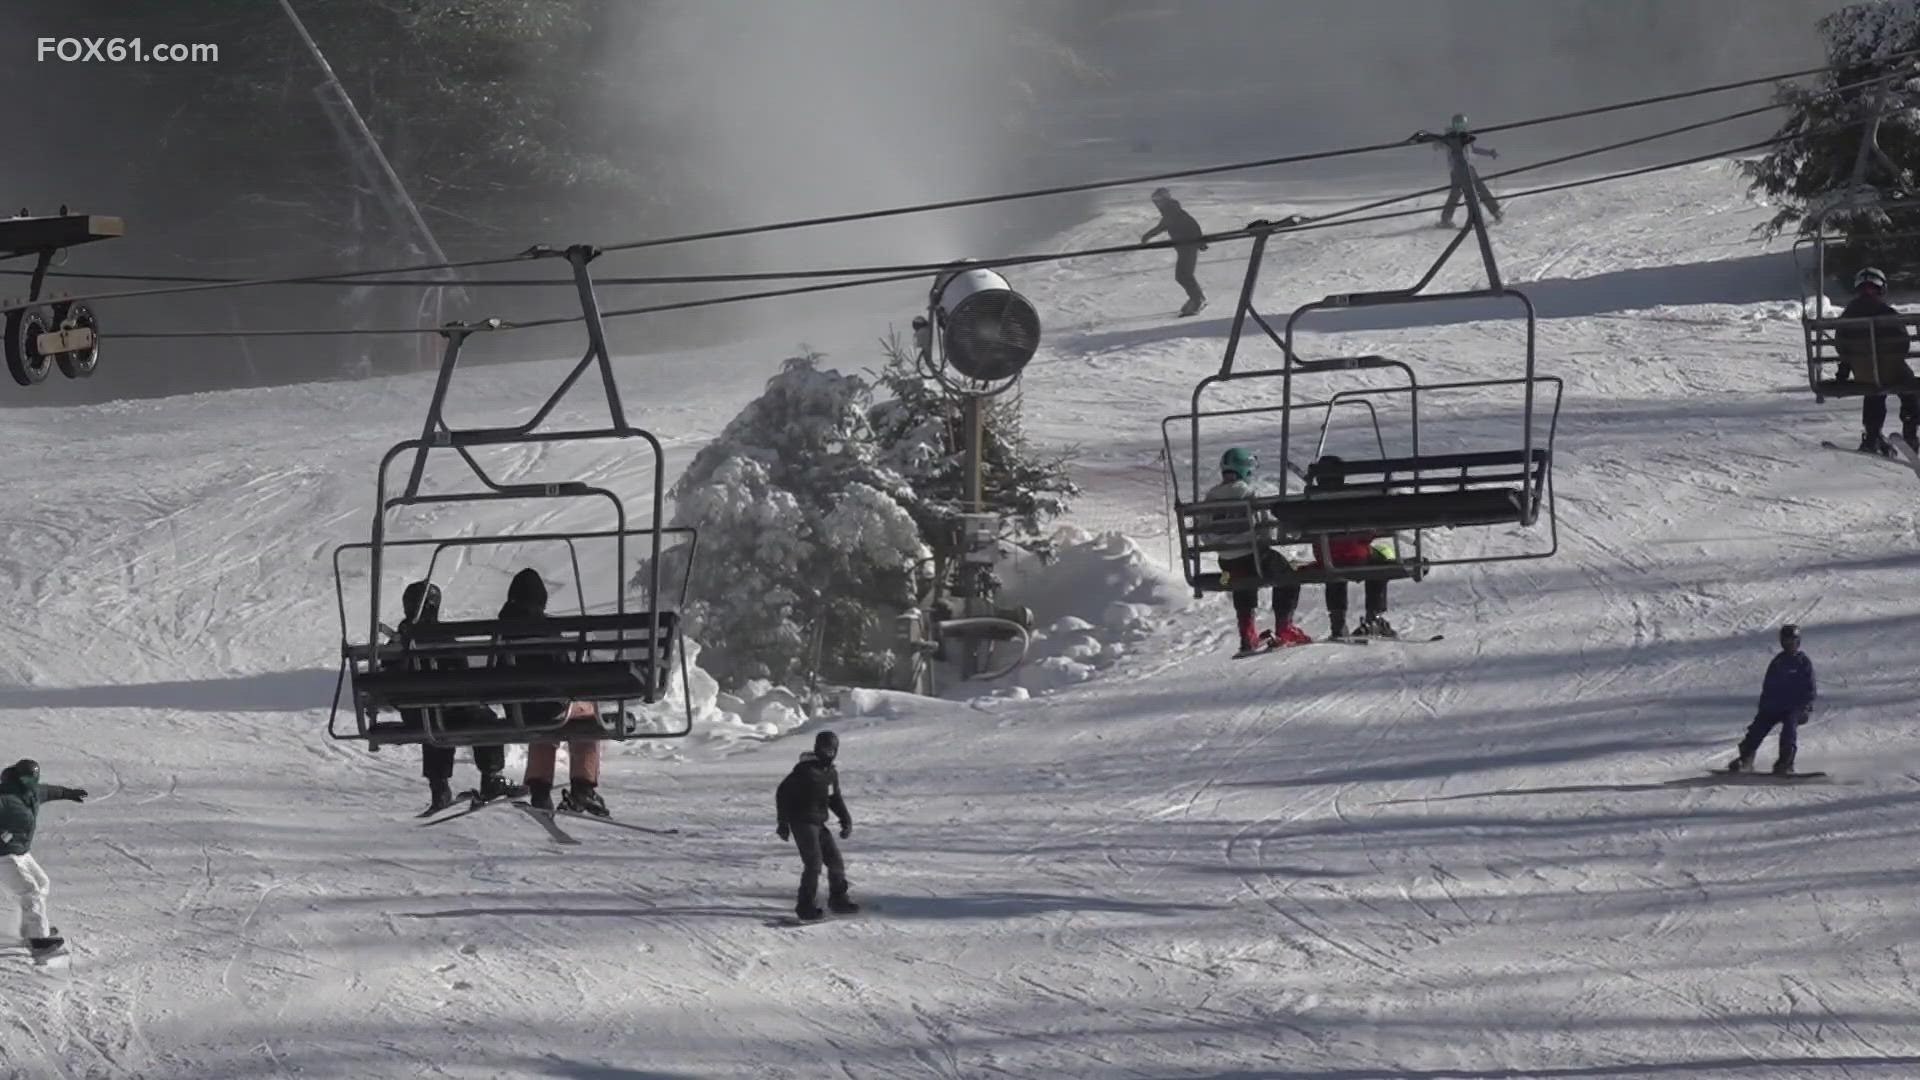 A 6-year-old boy is said to be recovering after falling more than 15 feet from a ski lift at Ski Sundown on Sunday.